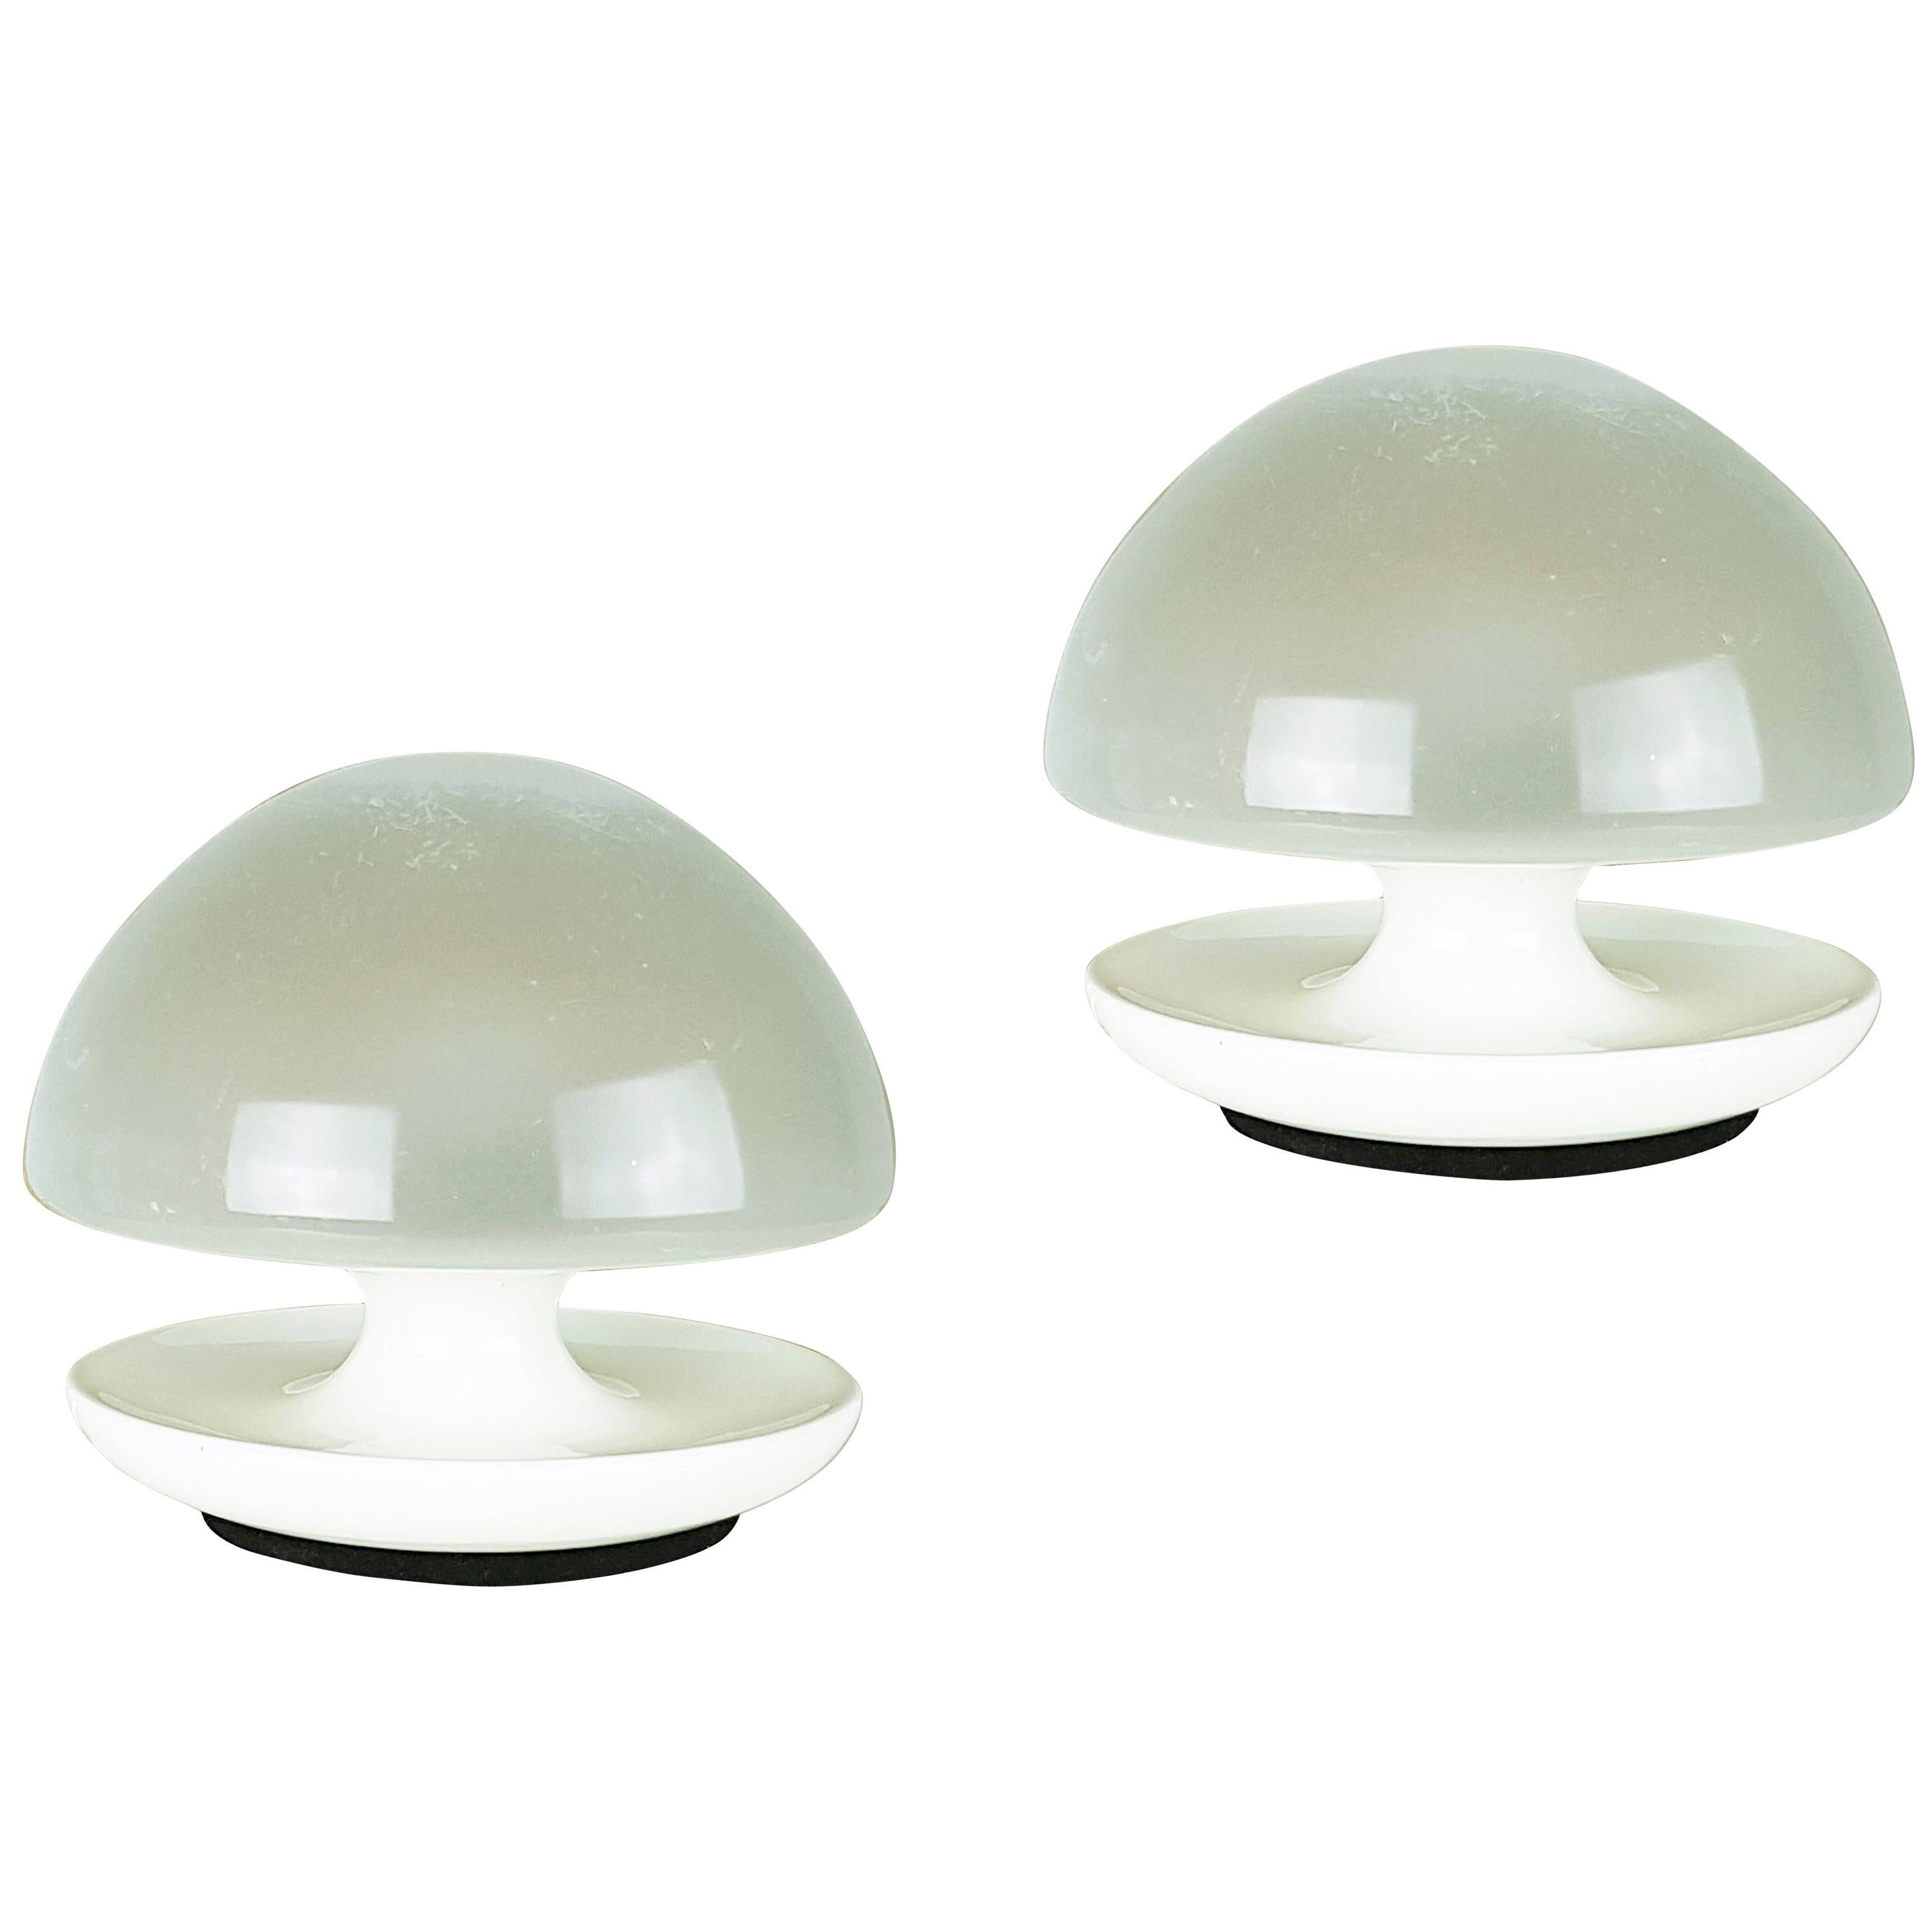 Pair of Space Age White Metal and Sandblasted Glass "VBO" Table Lamps by Sirrah